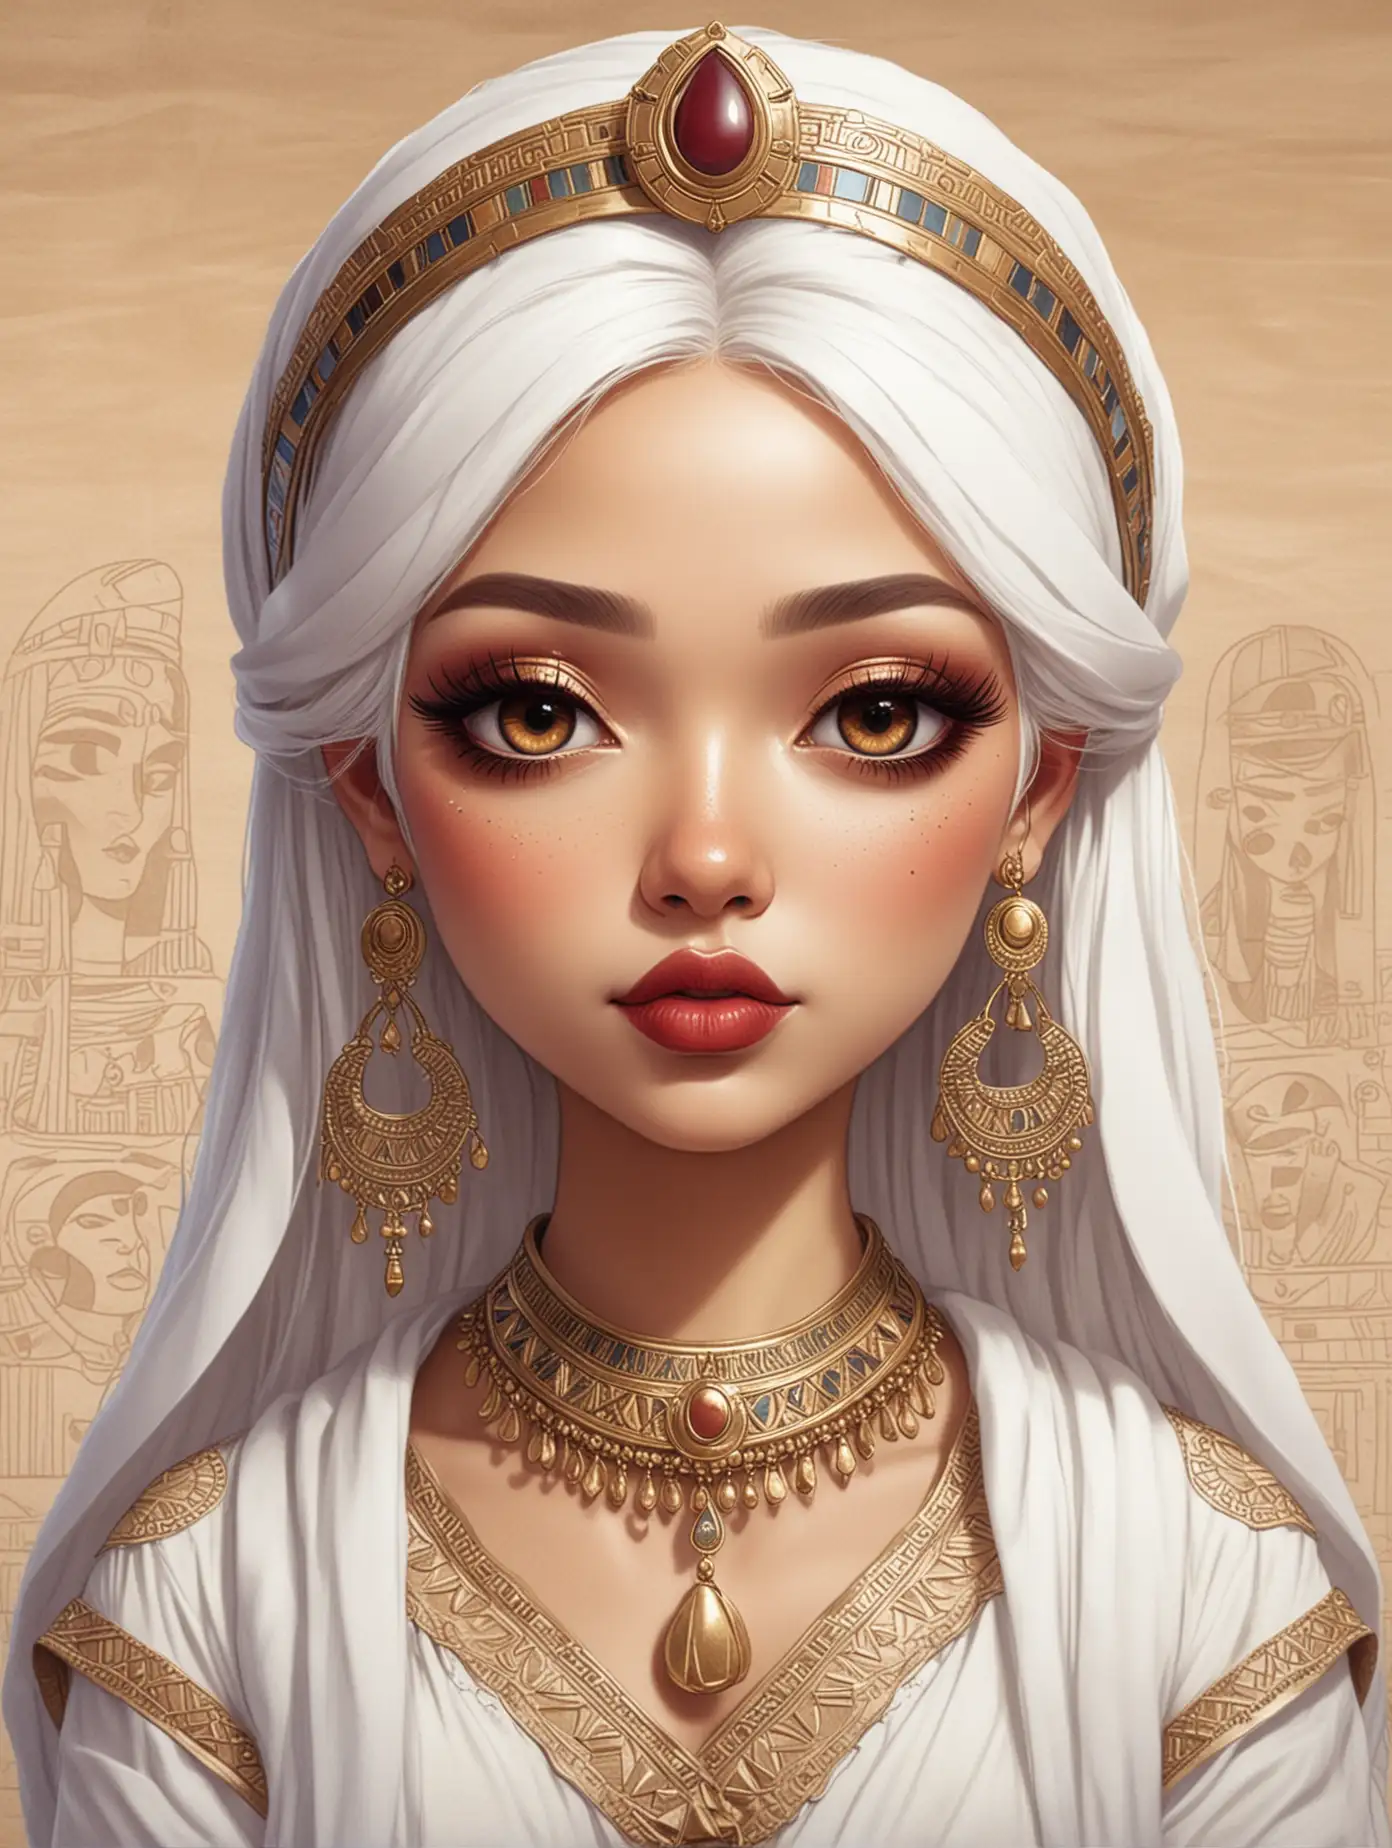 ChibiStyle Ancient Egyptian Beauty with Plump Lips and Eyes